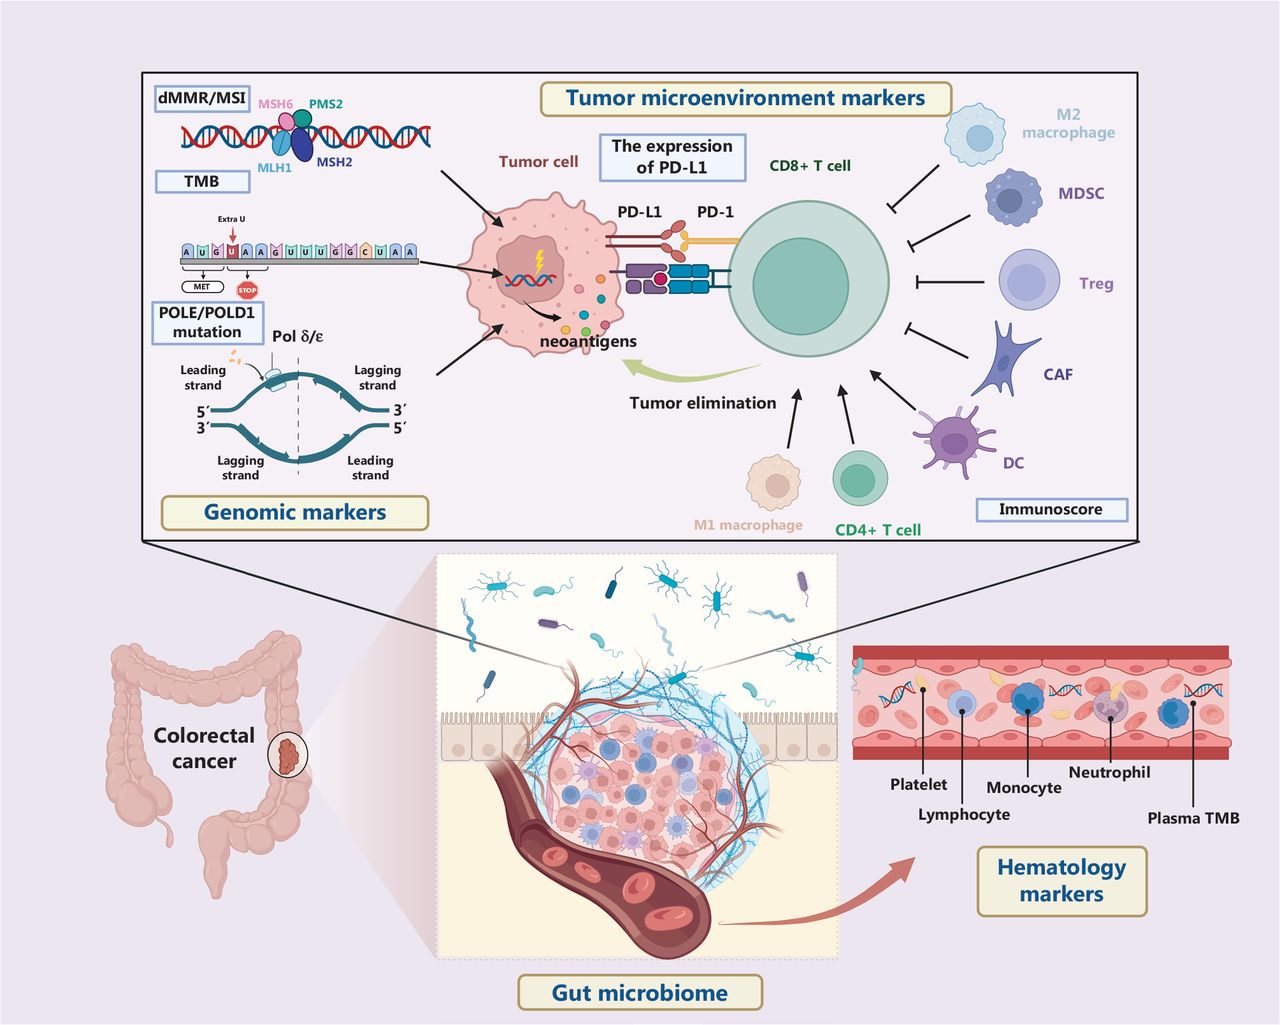 Biomarkers for immune checkpoint inhibitors in colorectal cancer